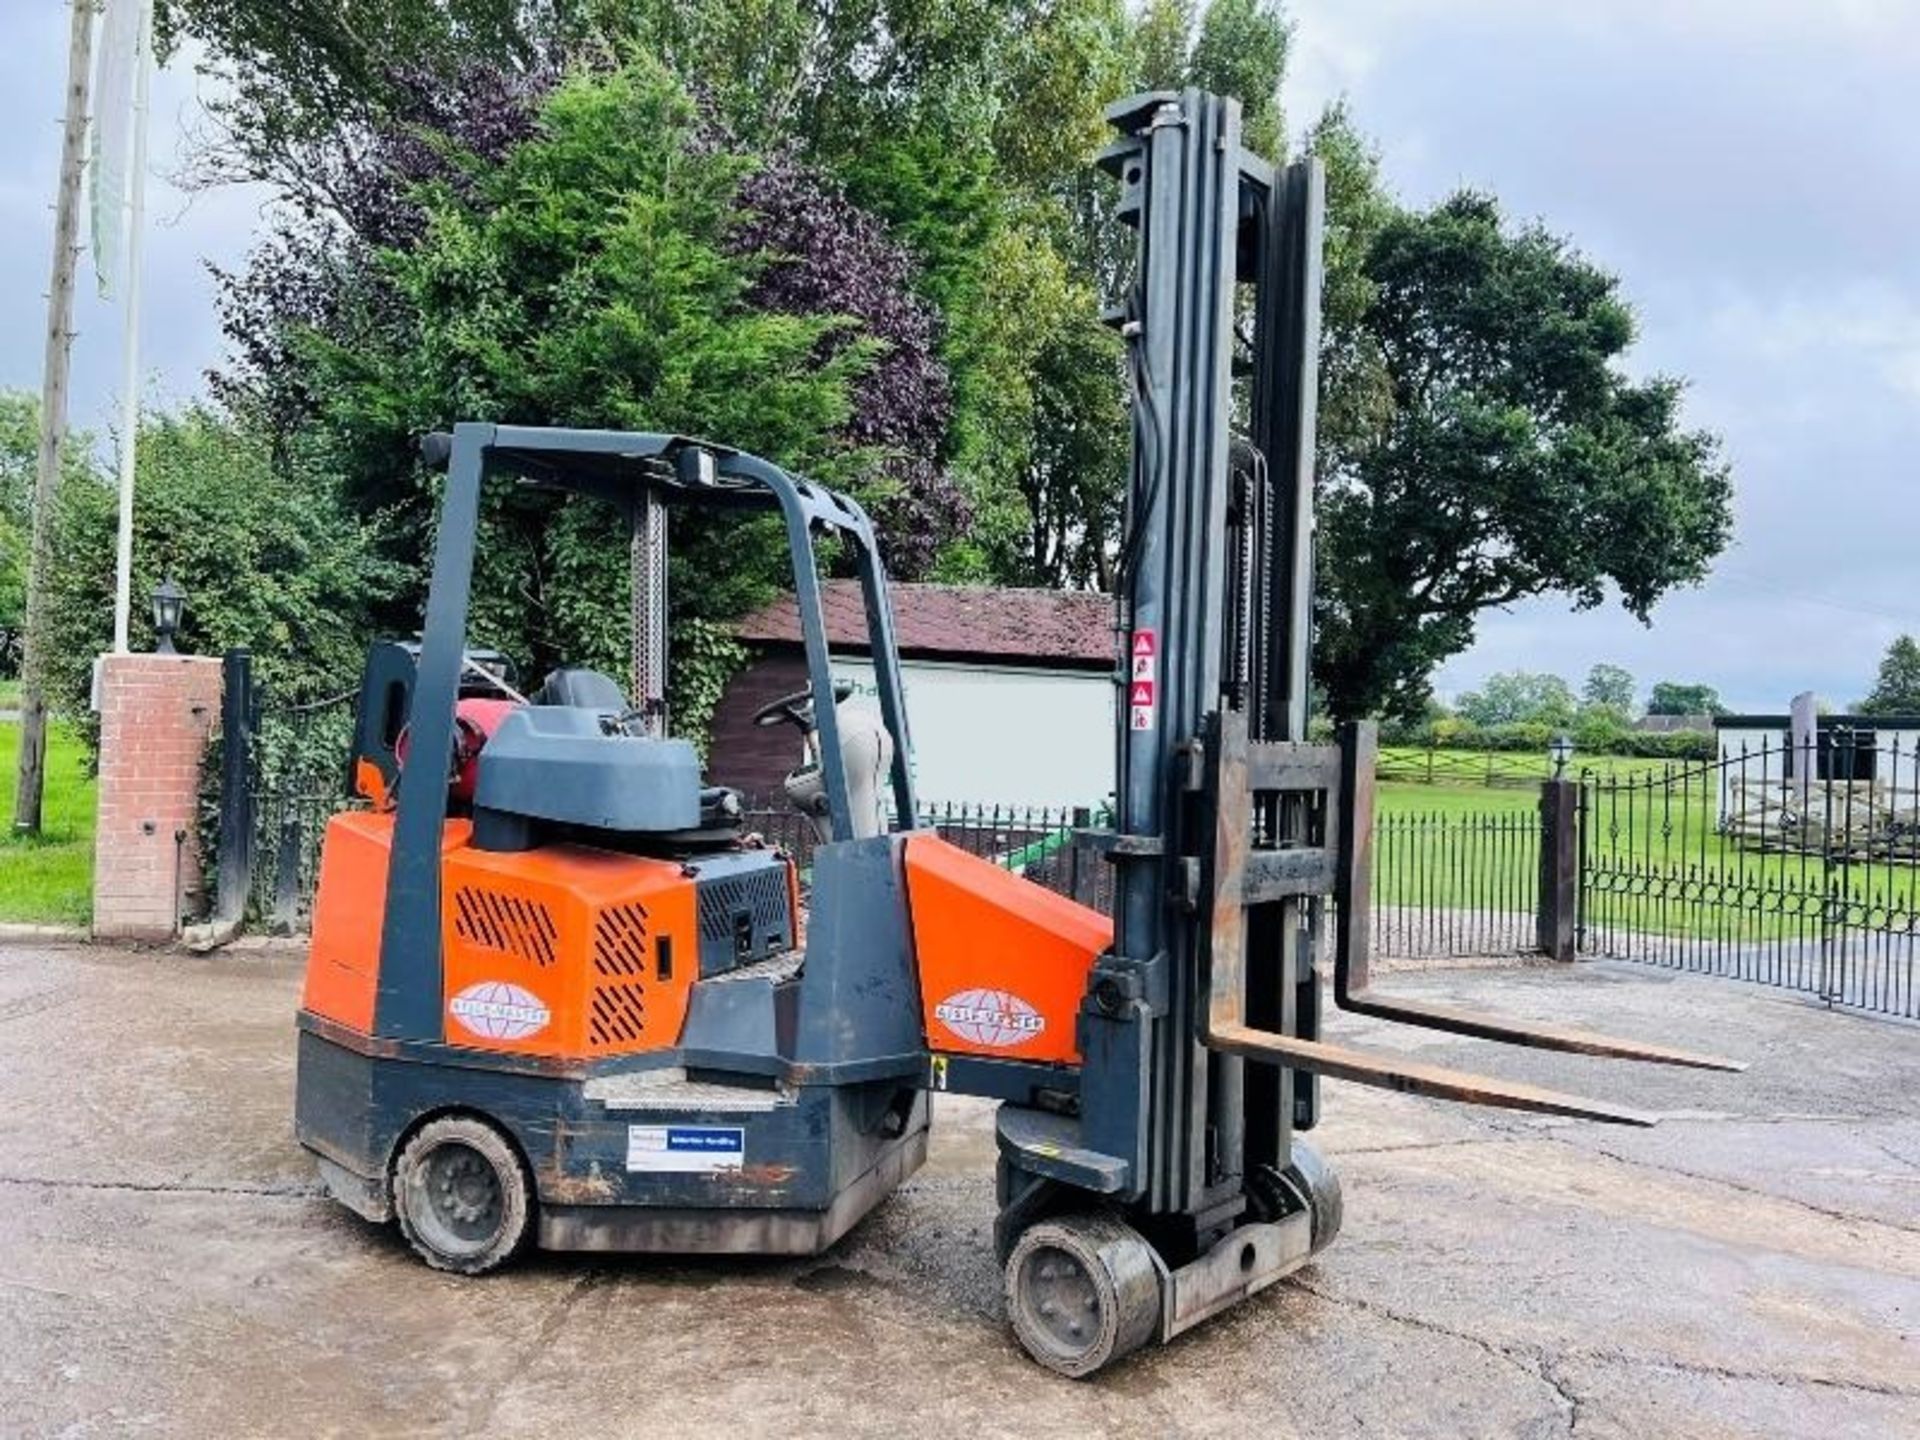 AISLE - MASTER 20S FORKLIFT C/W 3 STAGE MAST & SID - Image 6 of 14